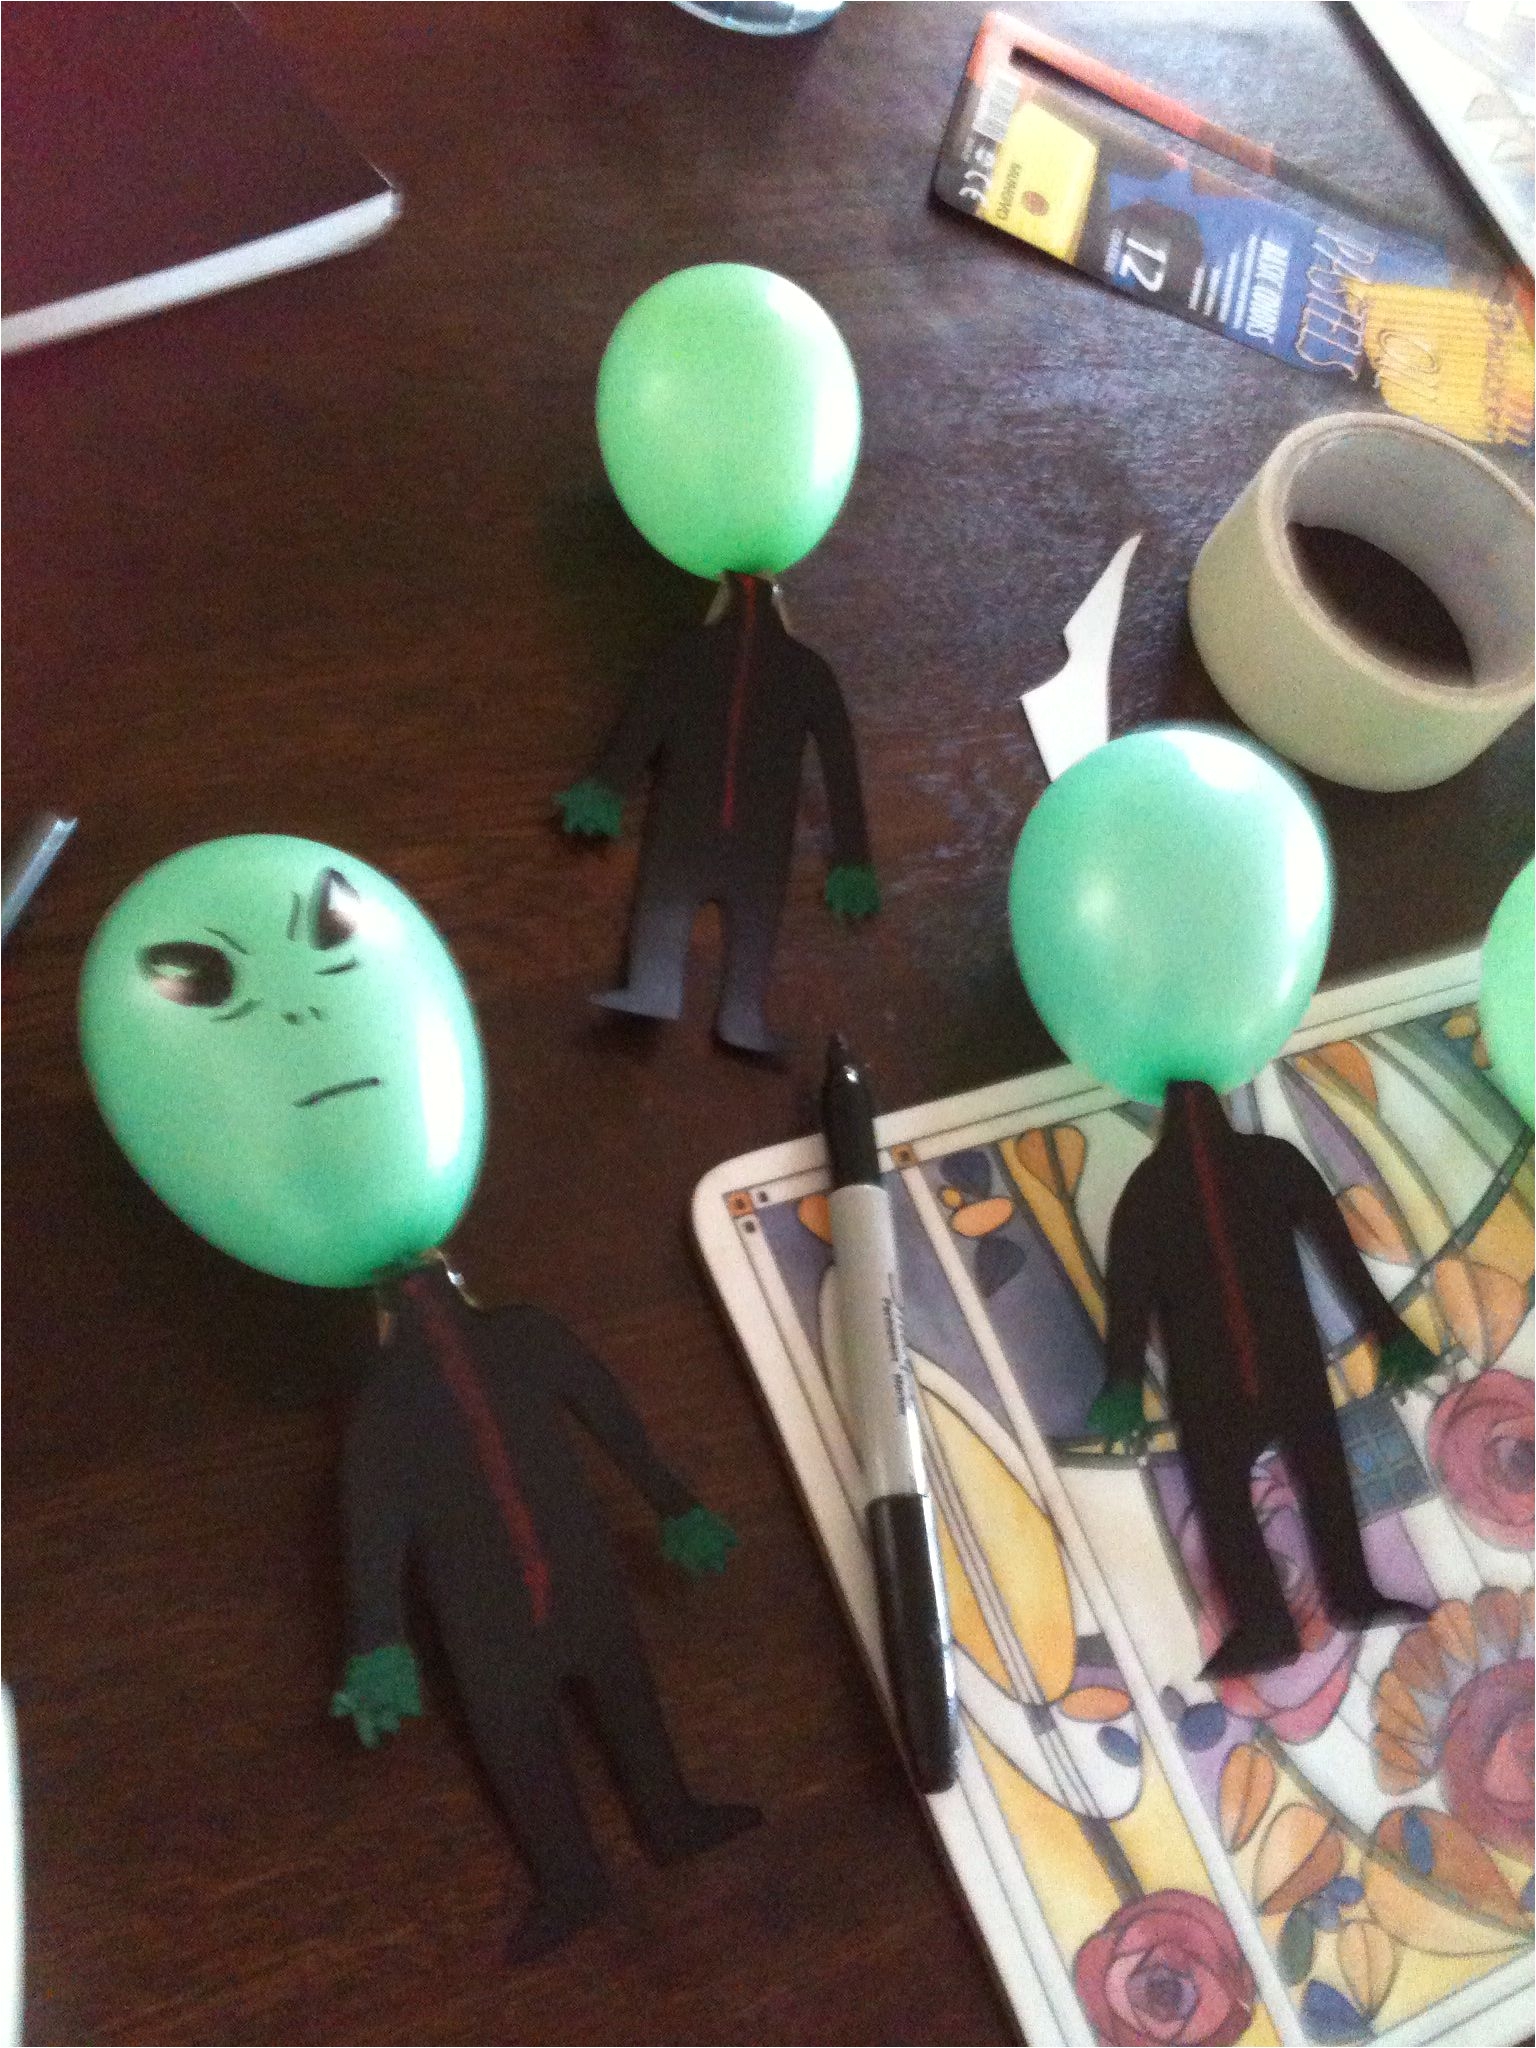 easy aliens made out of balloons and cardboard great for halloween decorations